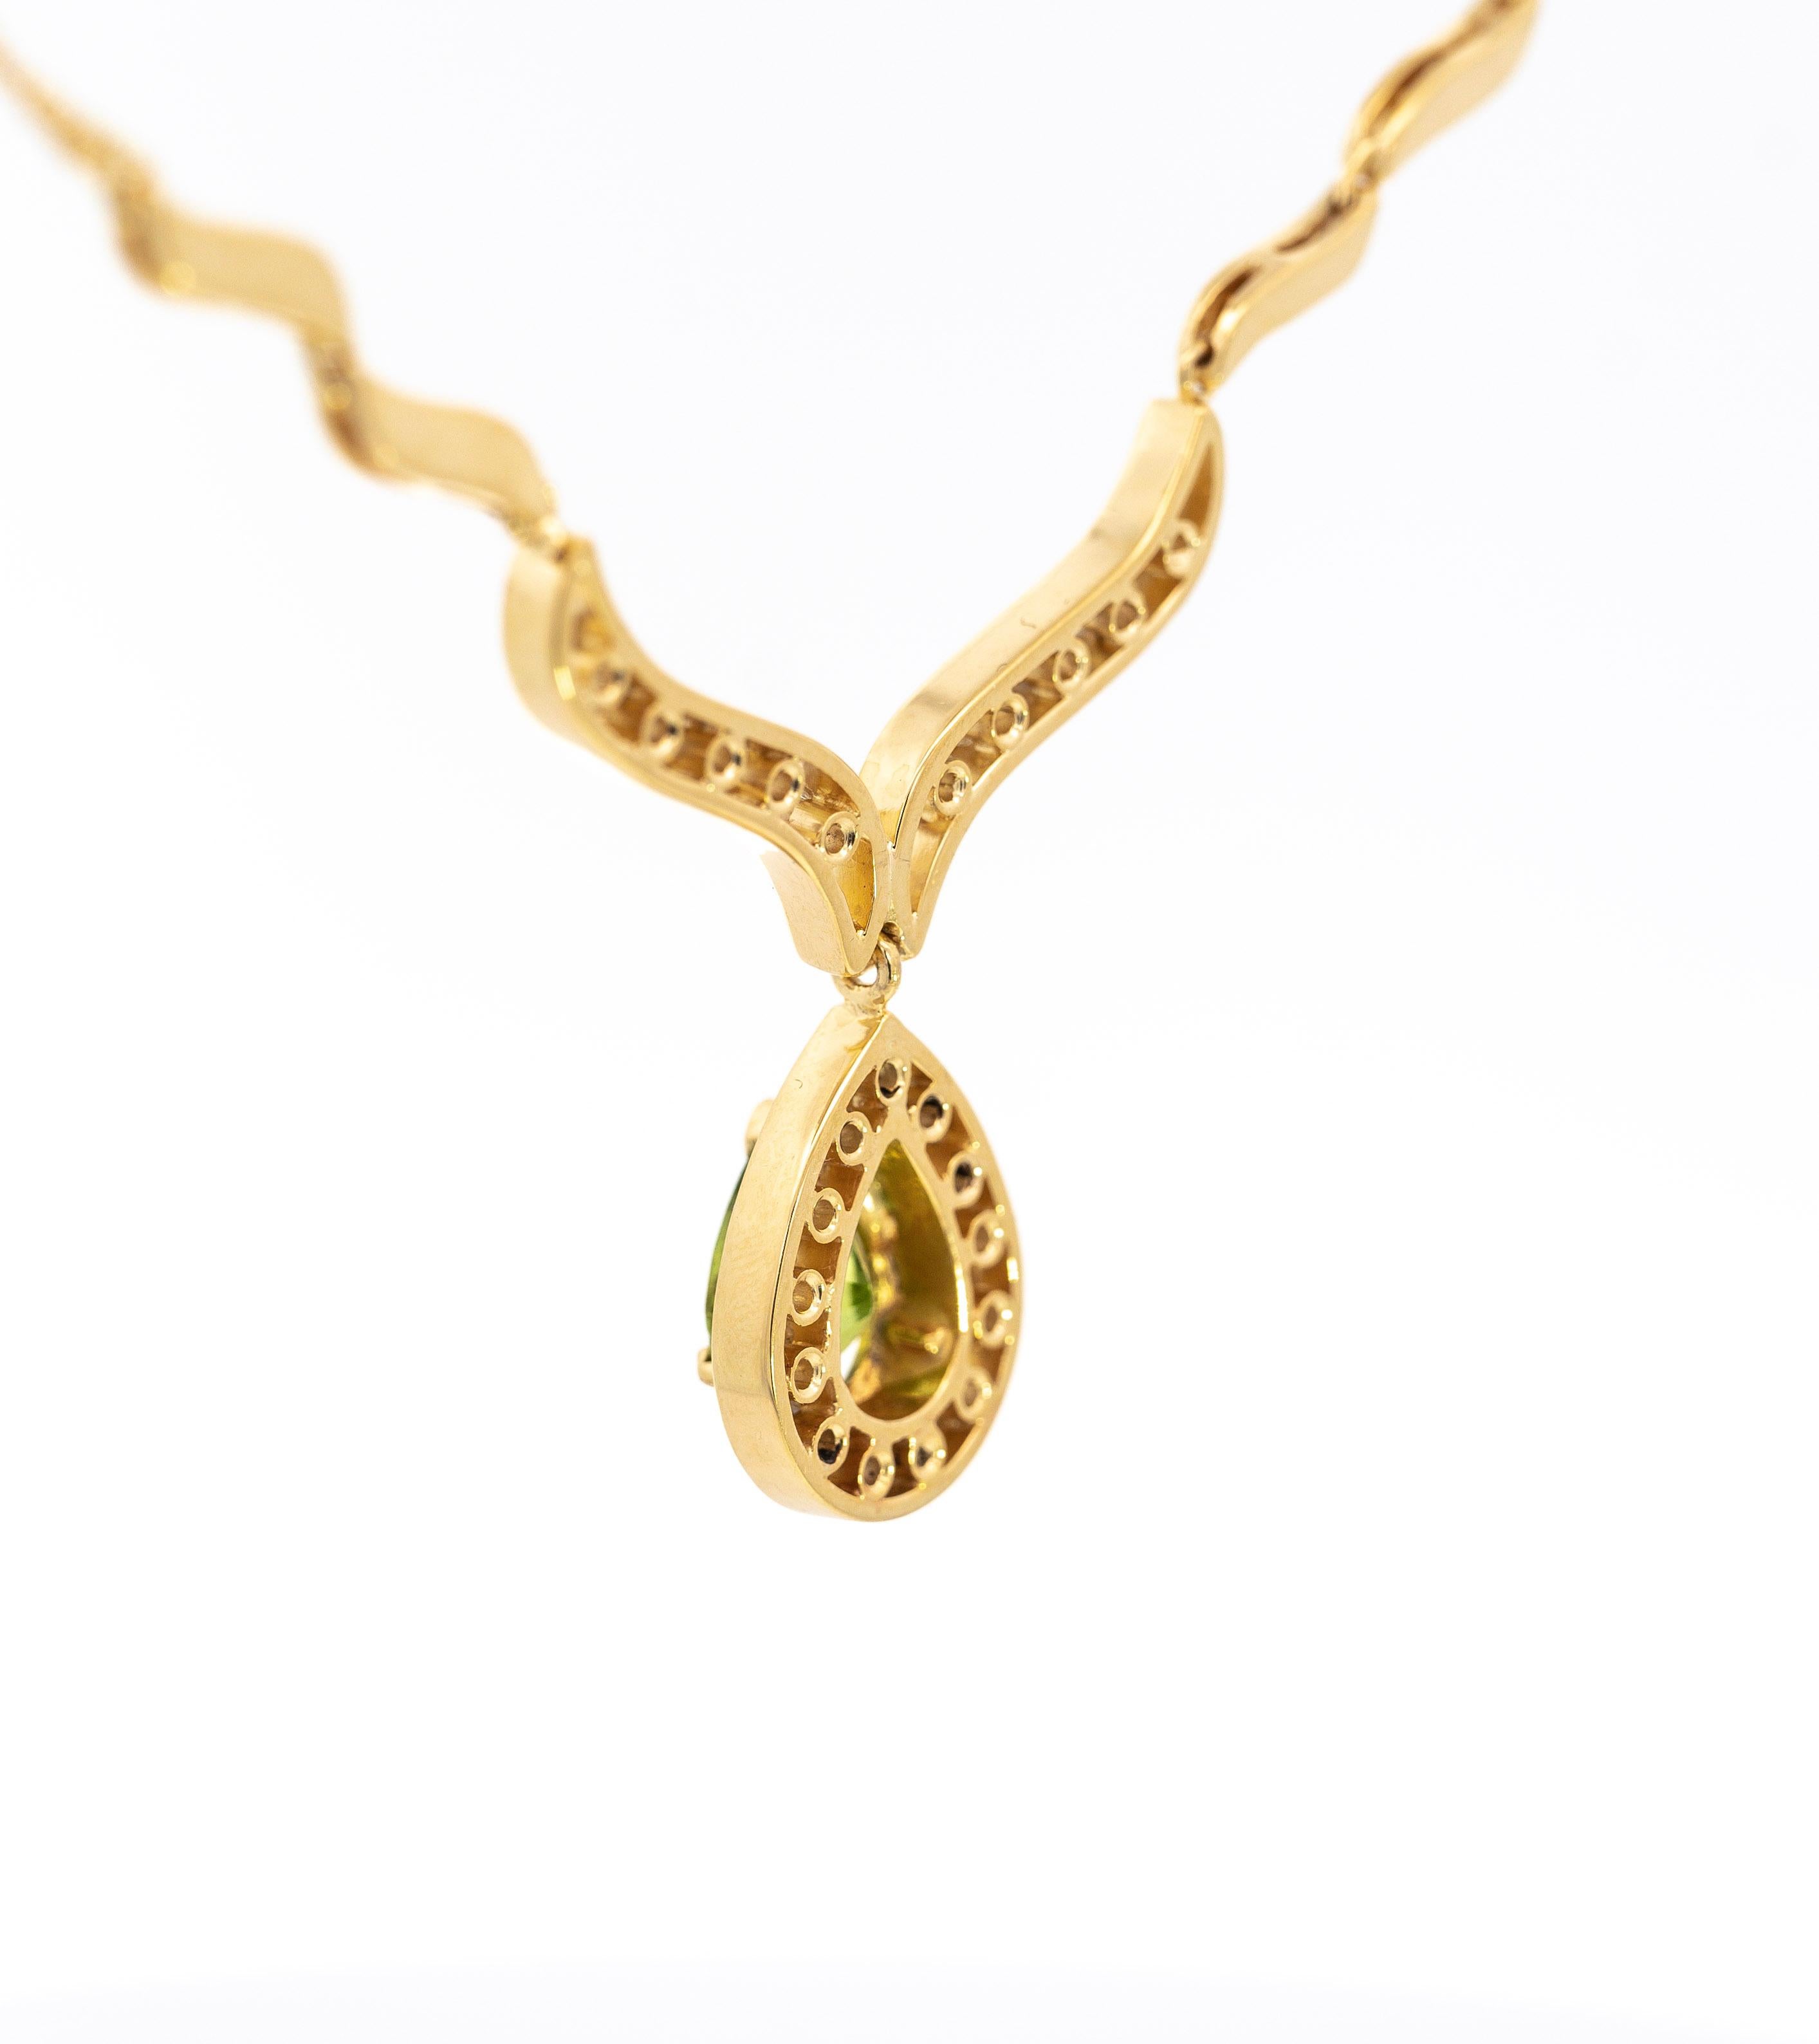 Vintage Pear Cut Green Peridot Drop Pendant Necklace with Diamonds in 18K Gold For Sale 2